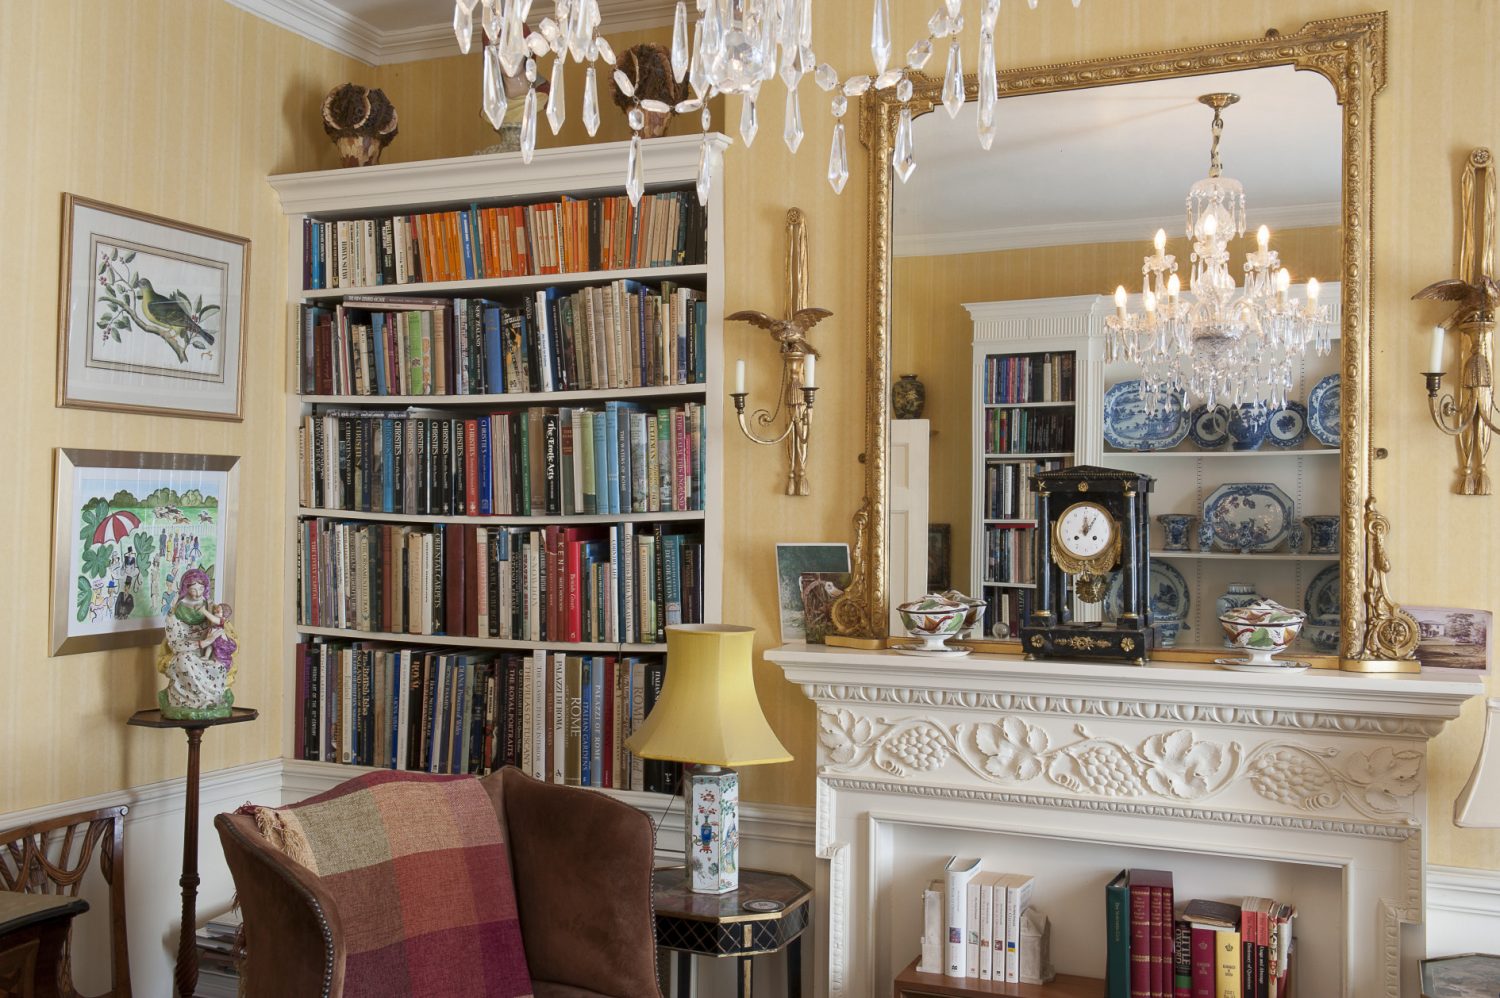 The morning room on the first floor is filled with books and periodicals for guests to browse